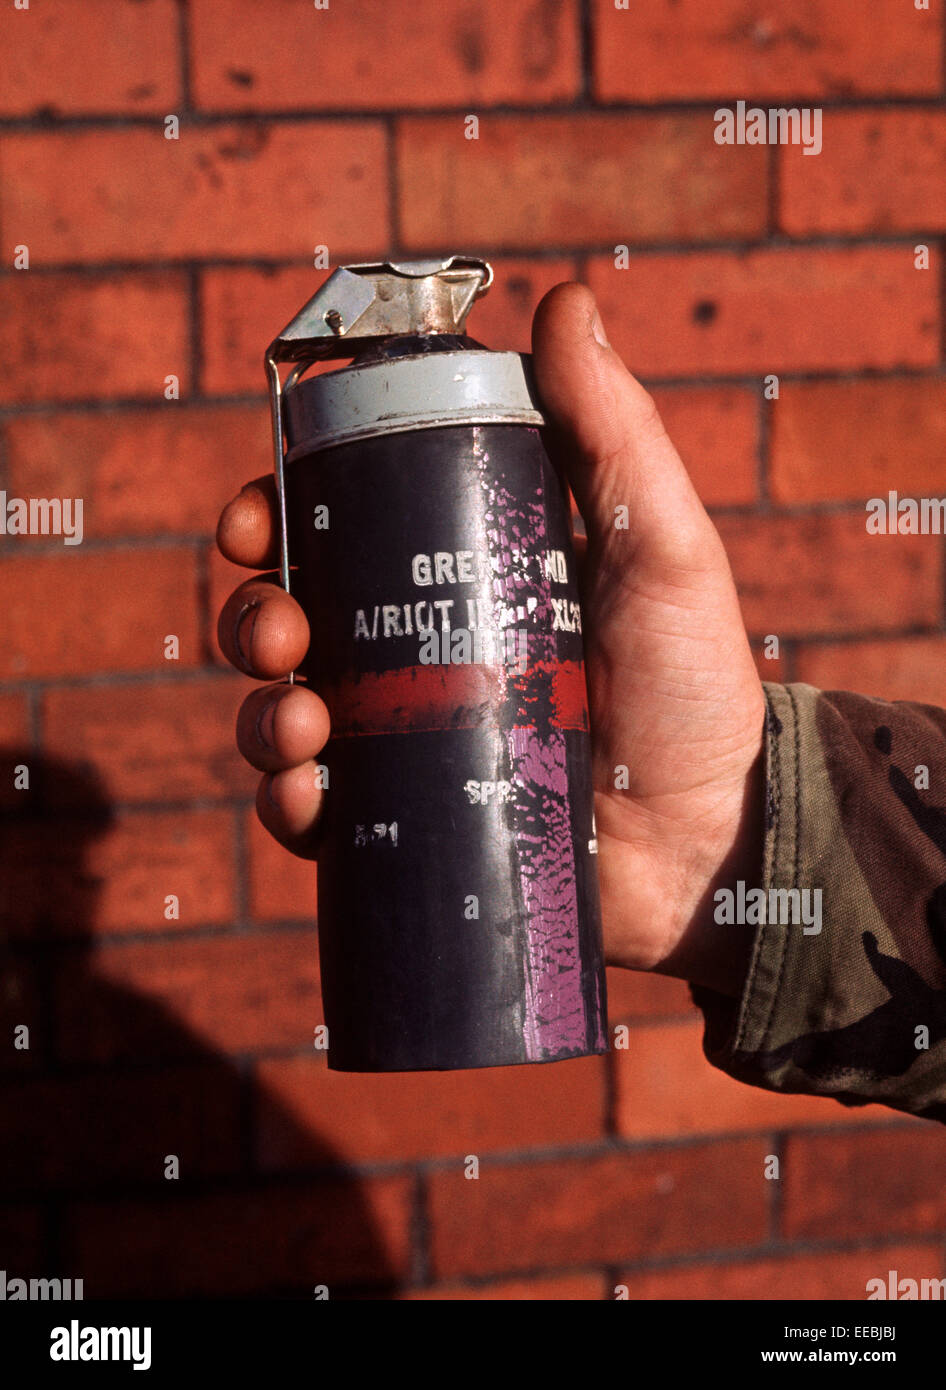 WEAPONS OF ULSTER - FEBRUARY 1972. CS Gas cannister used at the beginning of The Troubles by The British Army for Riot Control, Northern Ireland. Stock Photo